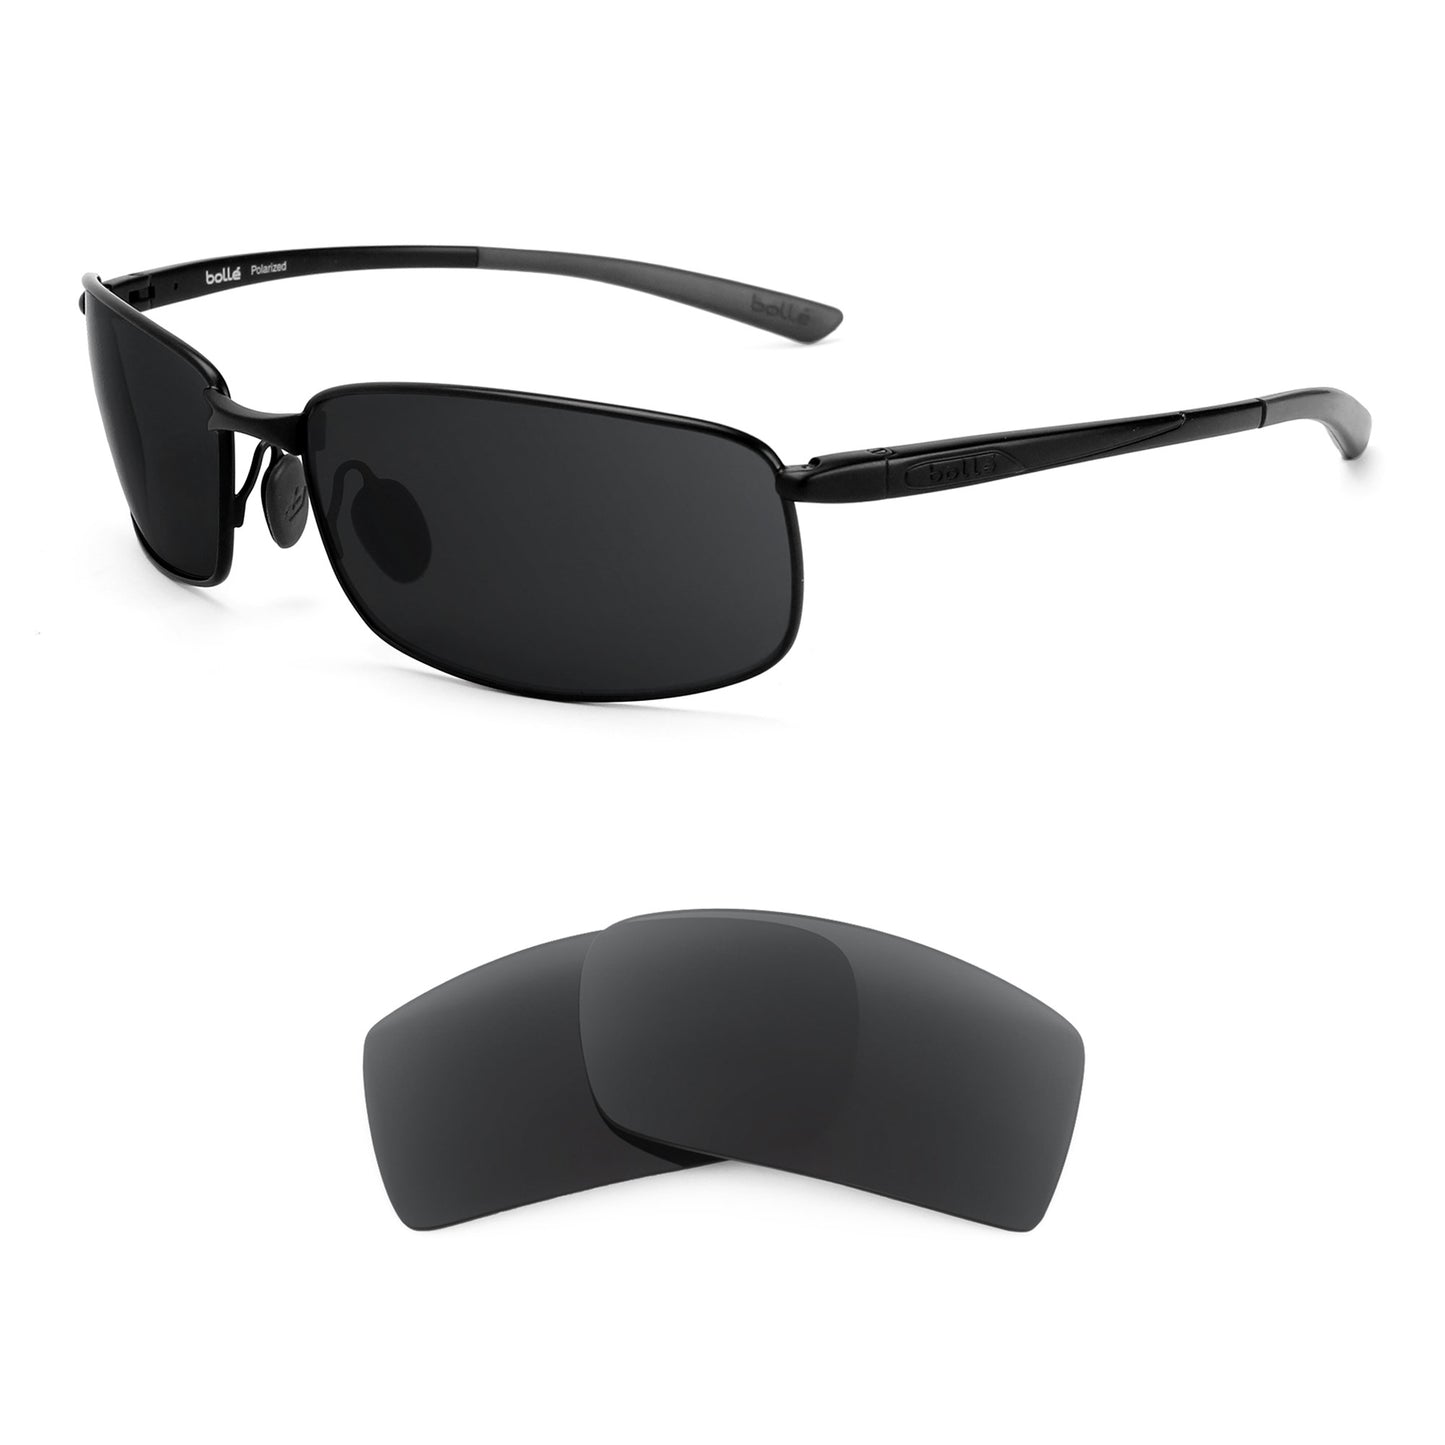 Bolle Benton sunglasses with replacement lenses